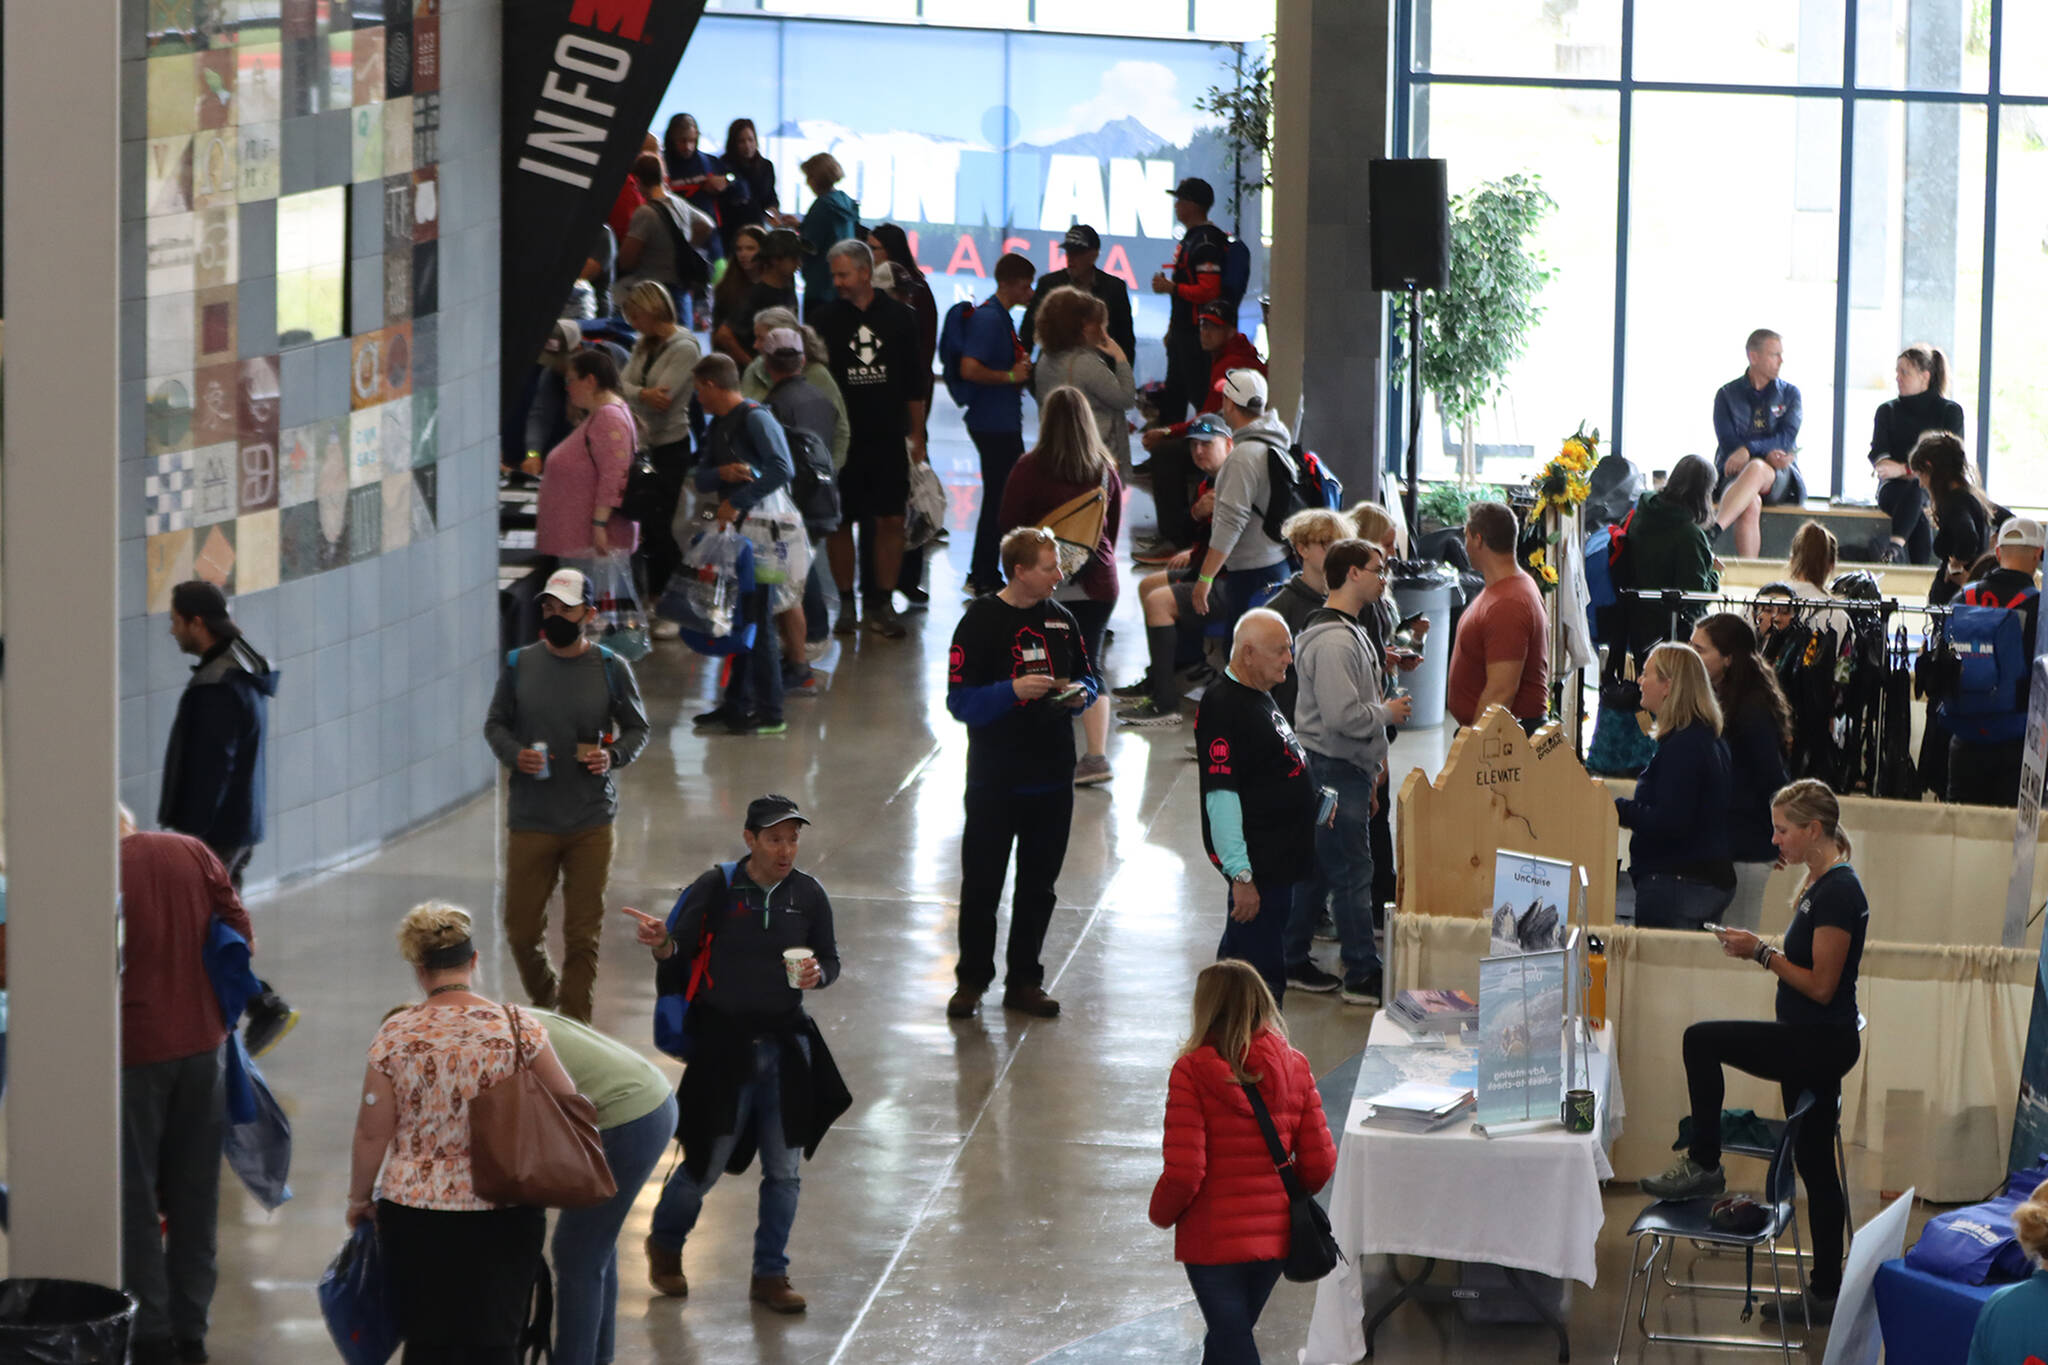 Athletes and race supporters walk the foyer of Thunder Mountain High School to visit the various Ironman and local booths open at the Ironman Village. (Ben Hohenstatt / Juneau Empire)